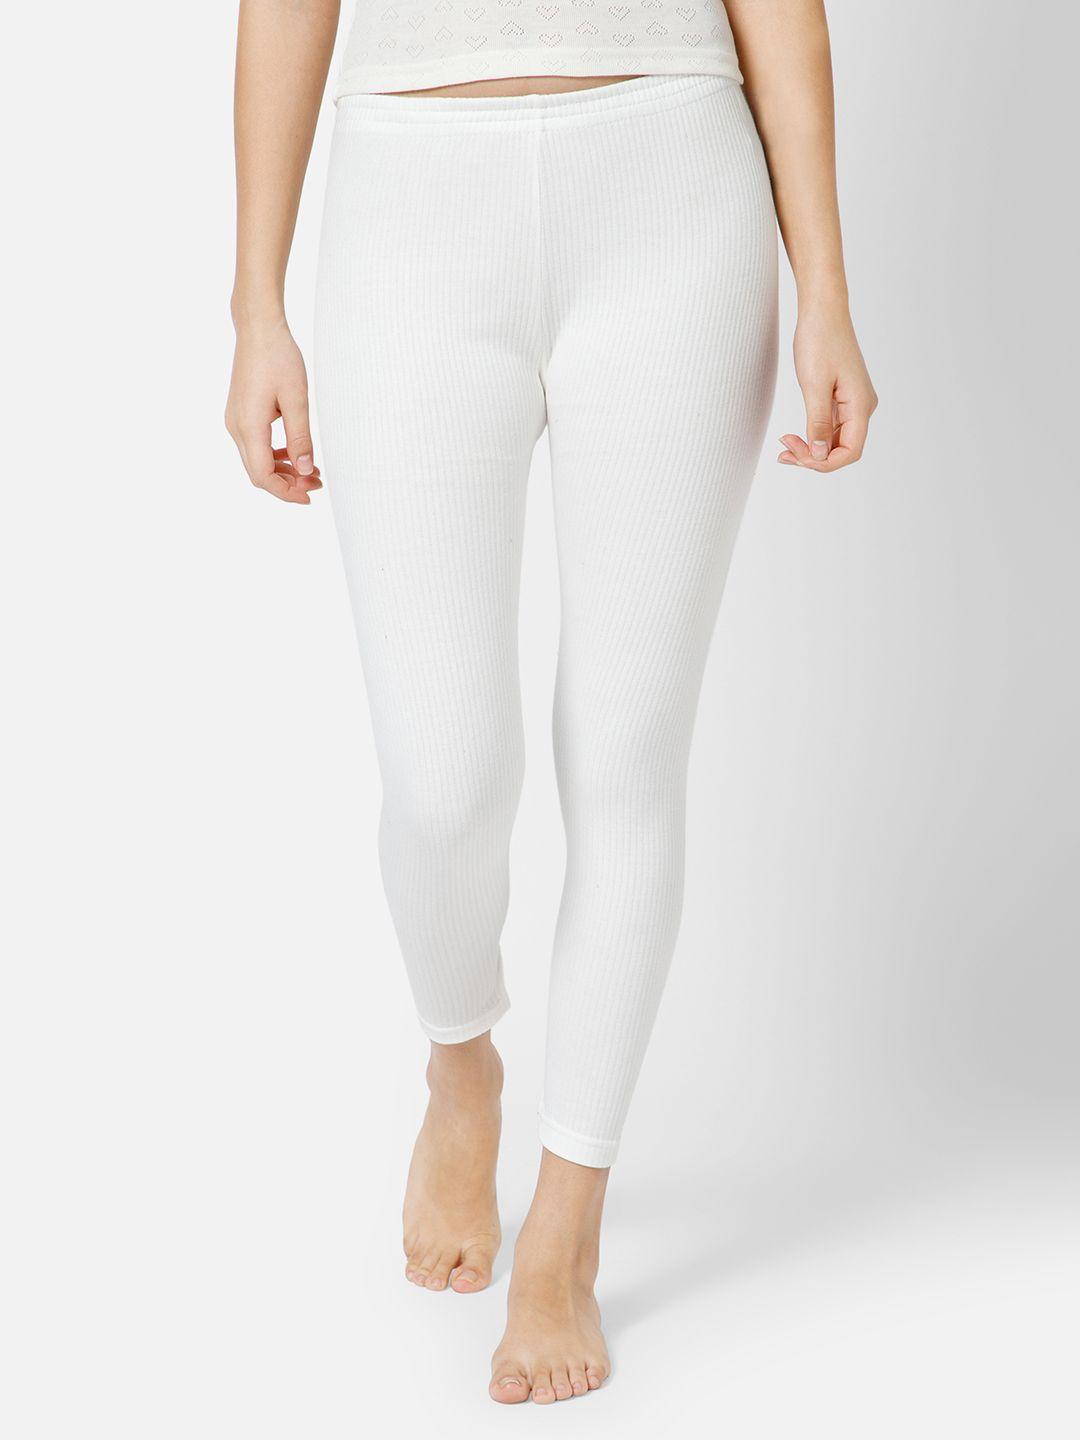 bodycare insider women off white solid skin-fit thermal bottoms